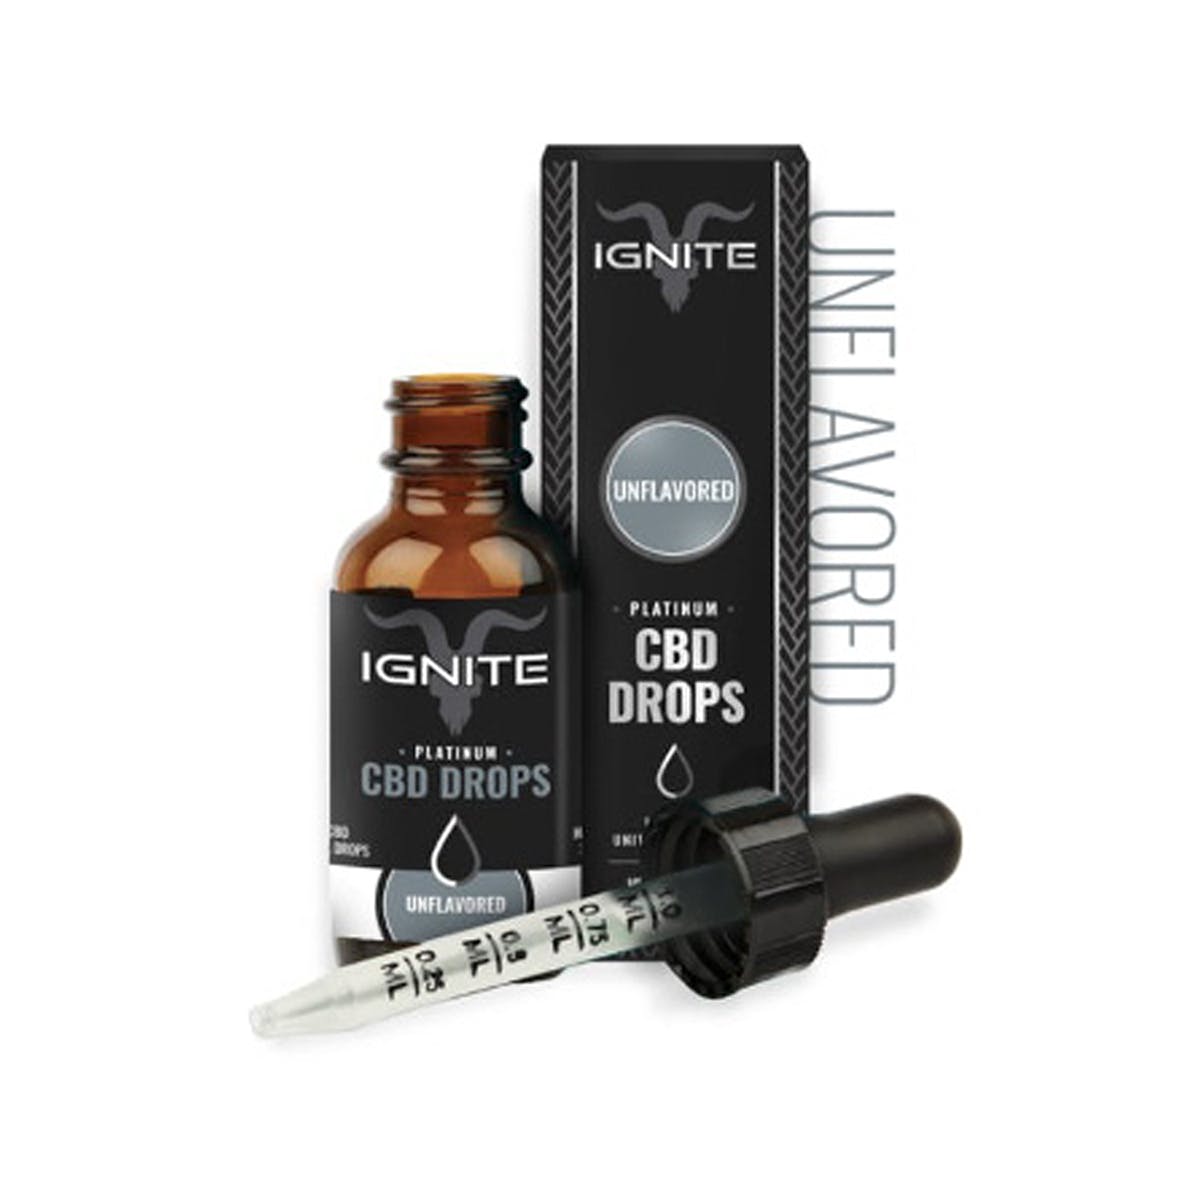 marijuana-dispensaries-pure-cbd-cbd-only-in-west-hollywood-unflavored-cbd-drops-1000mg